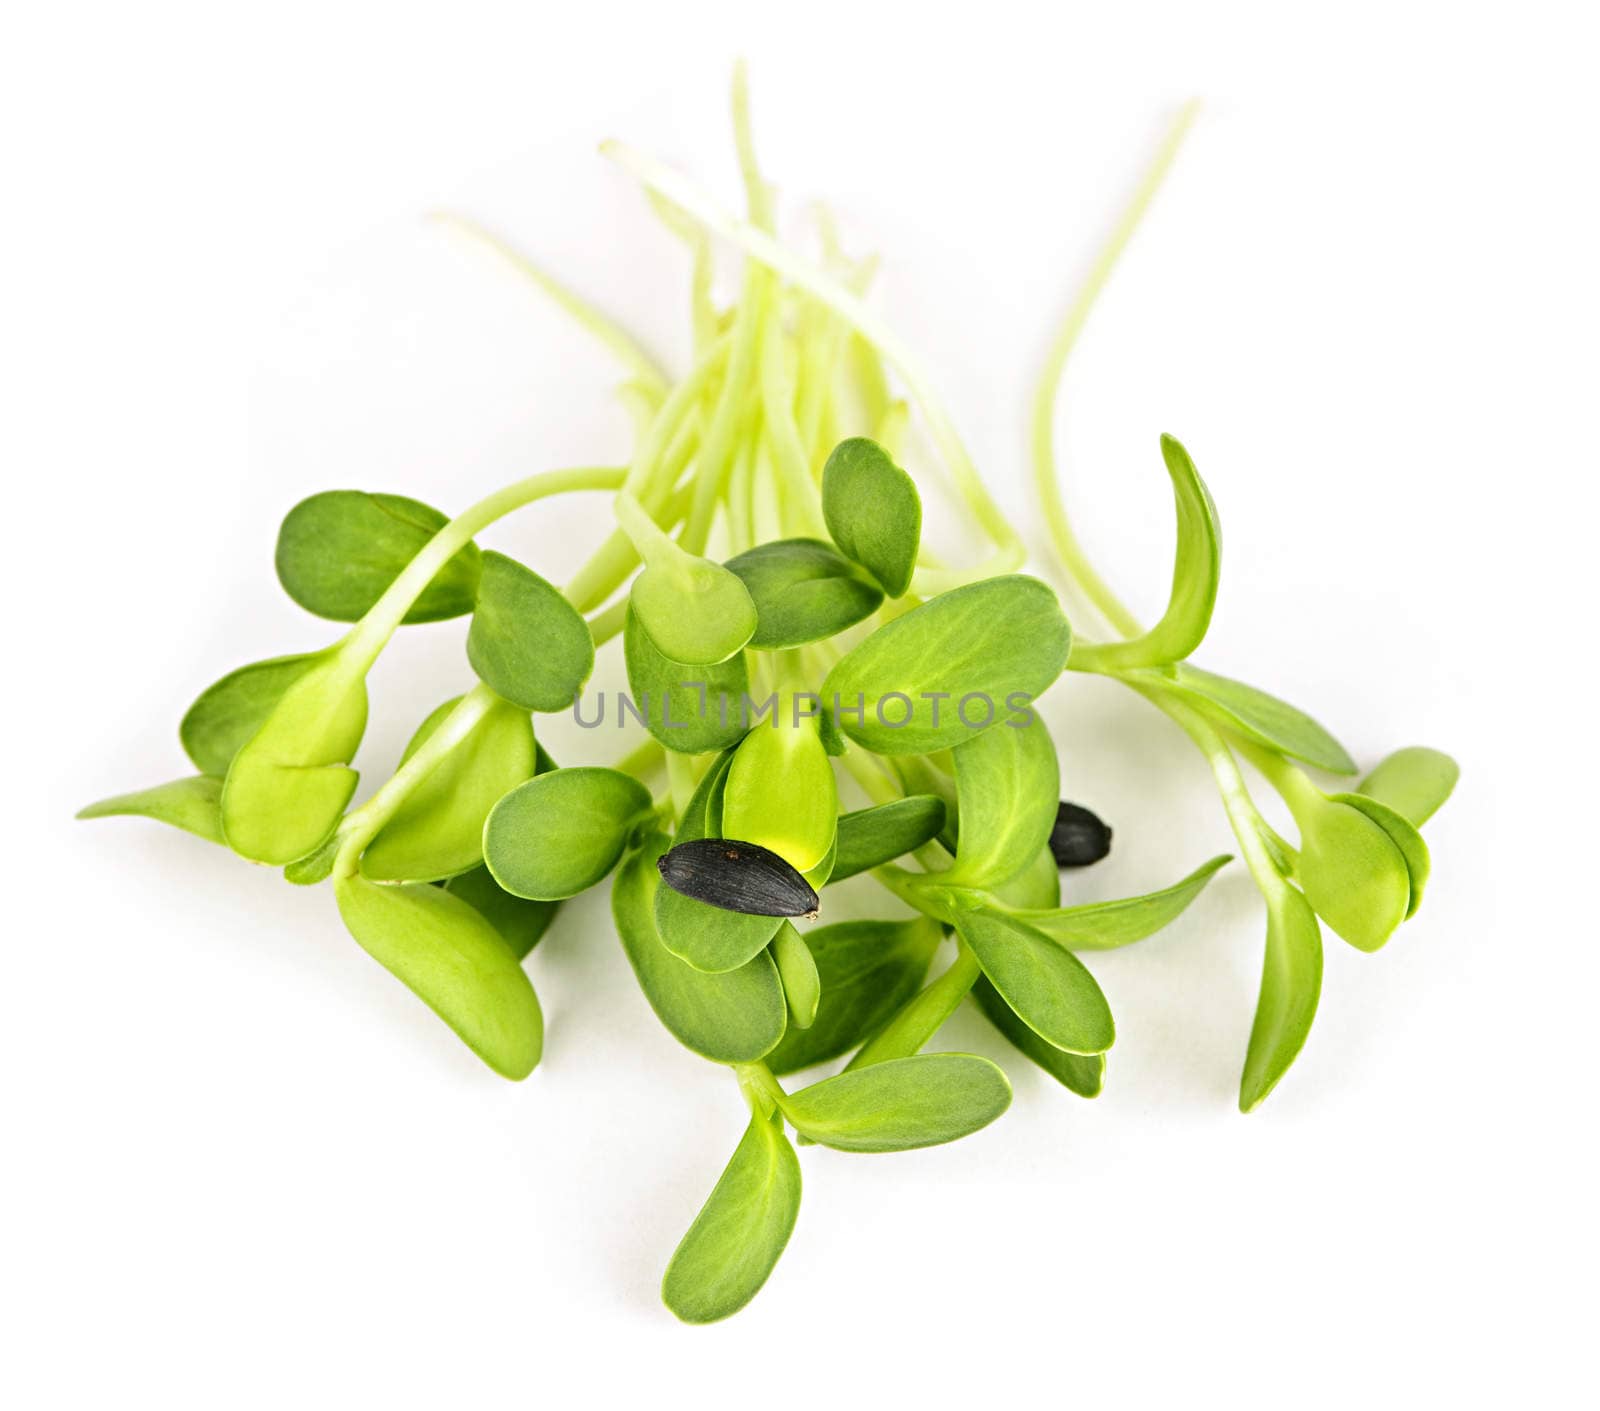 Organic green young sunflower sprouts isolated on white background